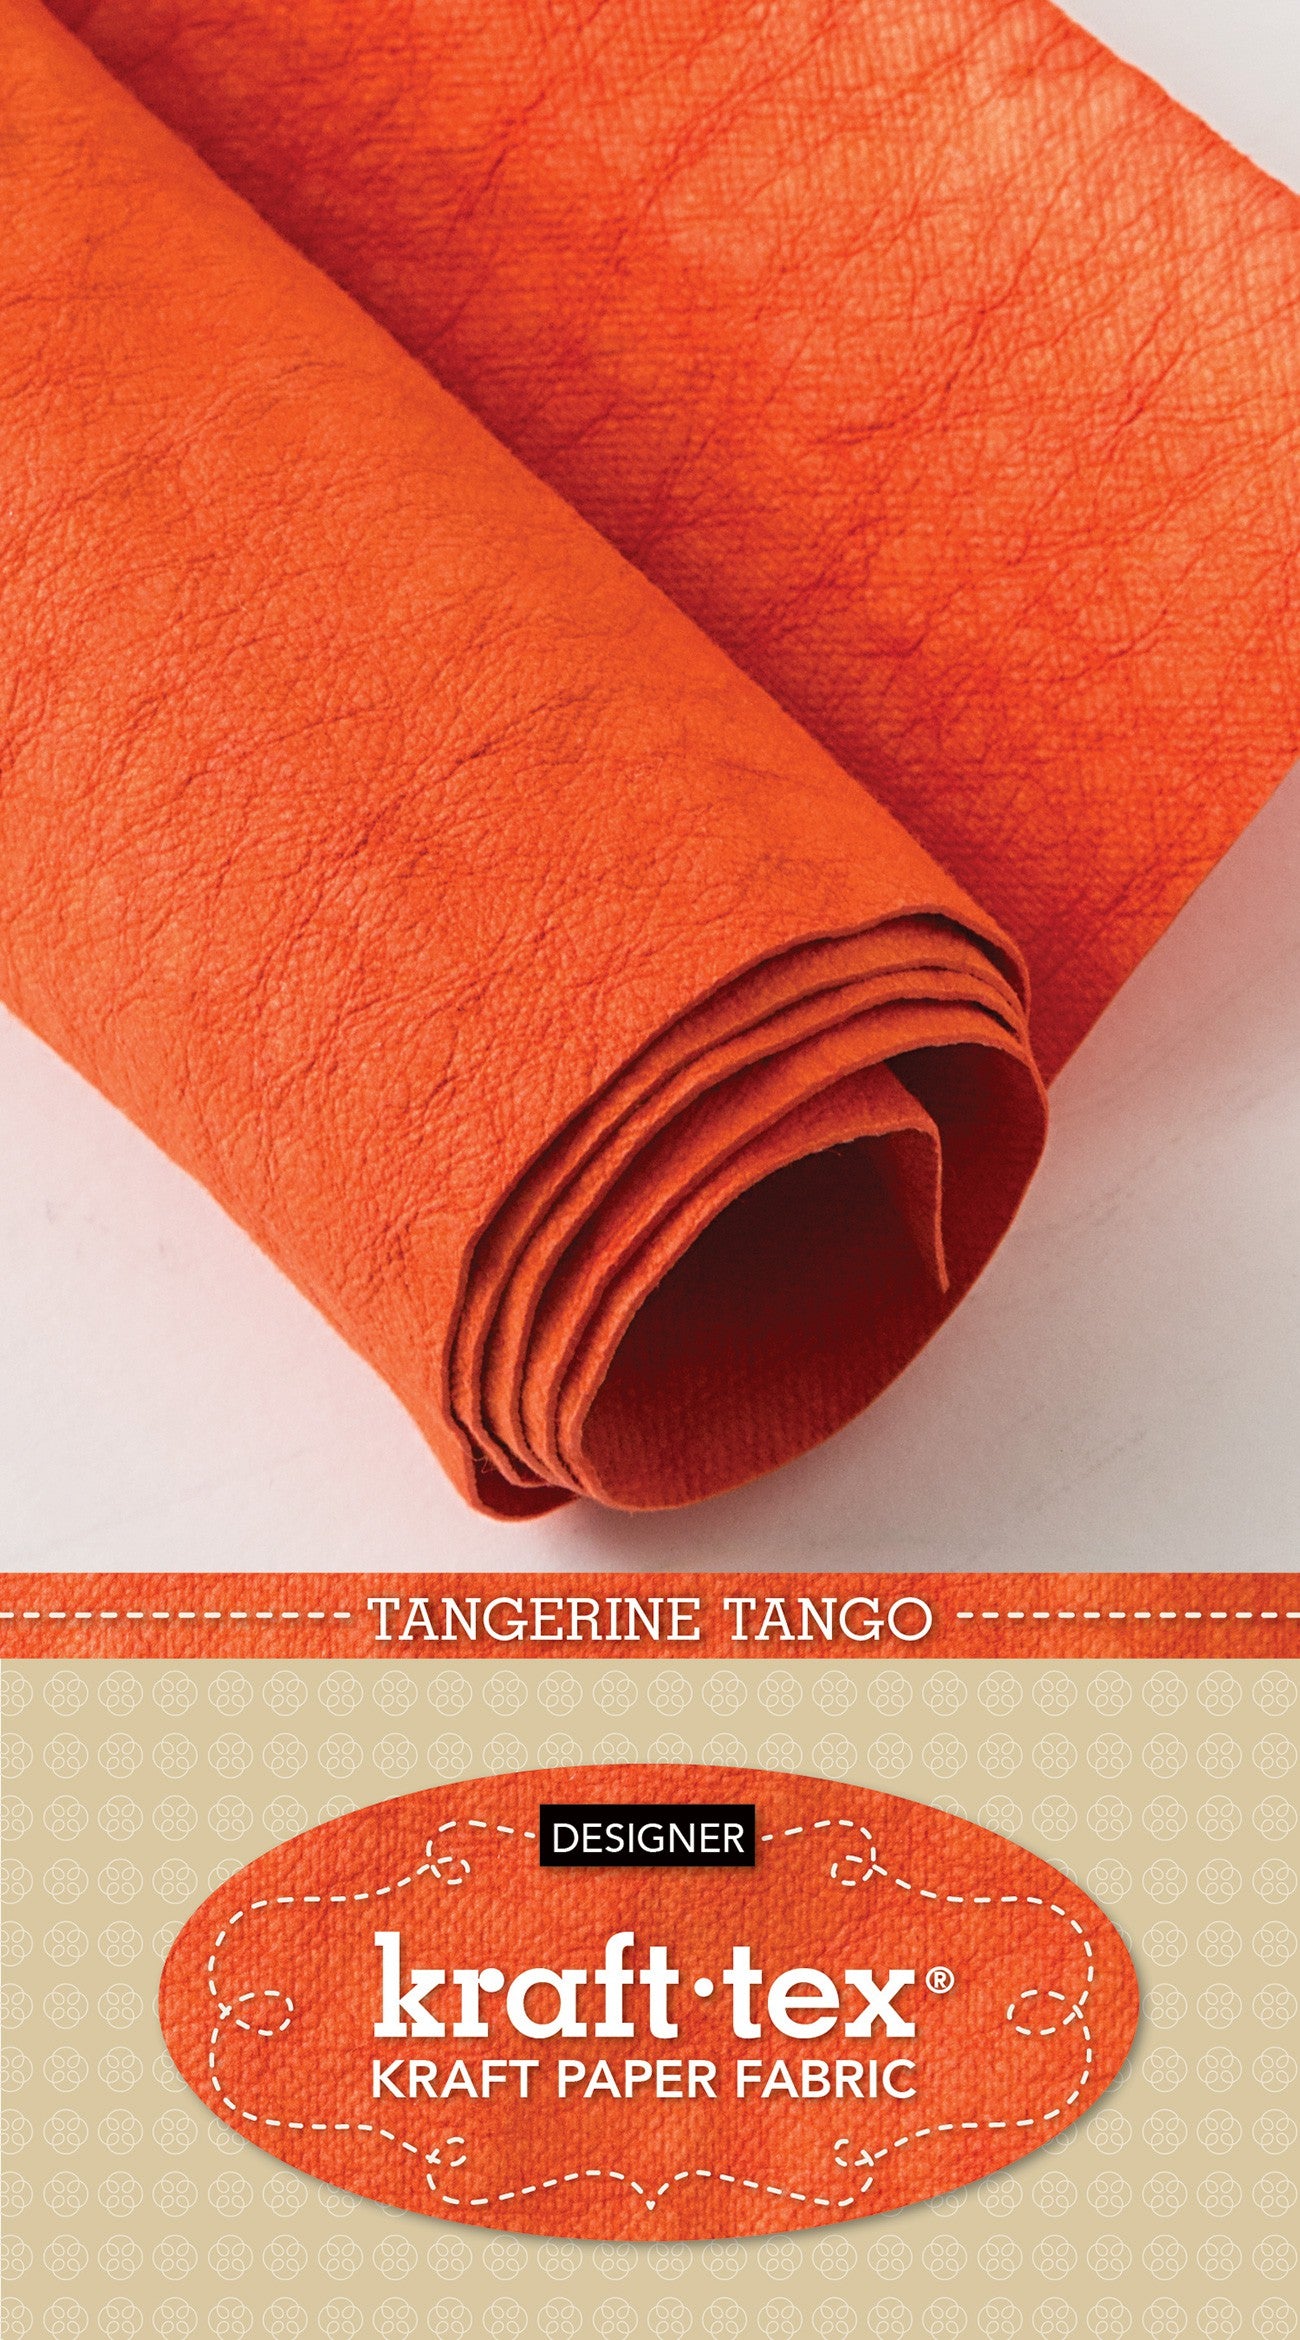 Kraft-Tex Roll, Designer Tangerine Tango, 18.5 Inches x 28.5 Inches Hand-Dyed Prewashed Paper Fabric